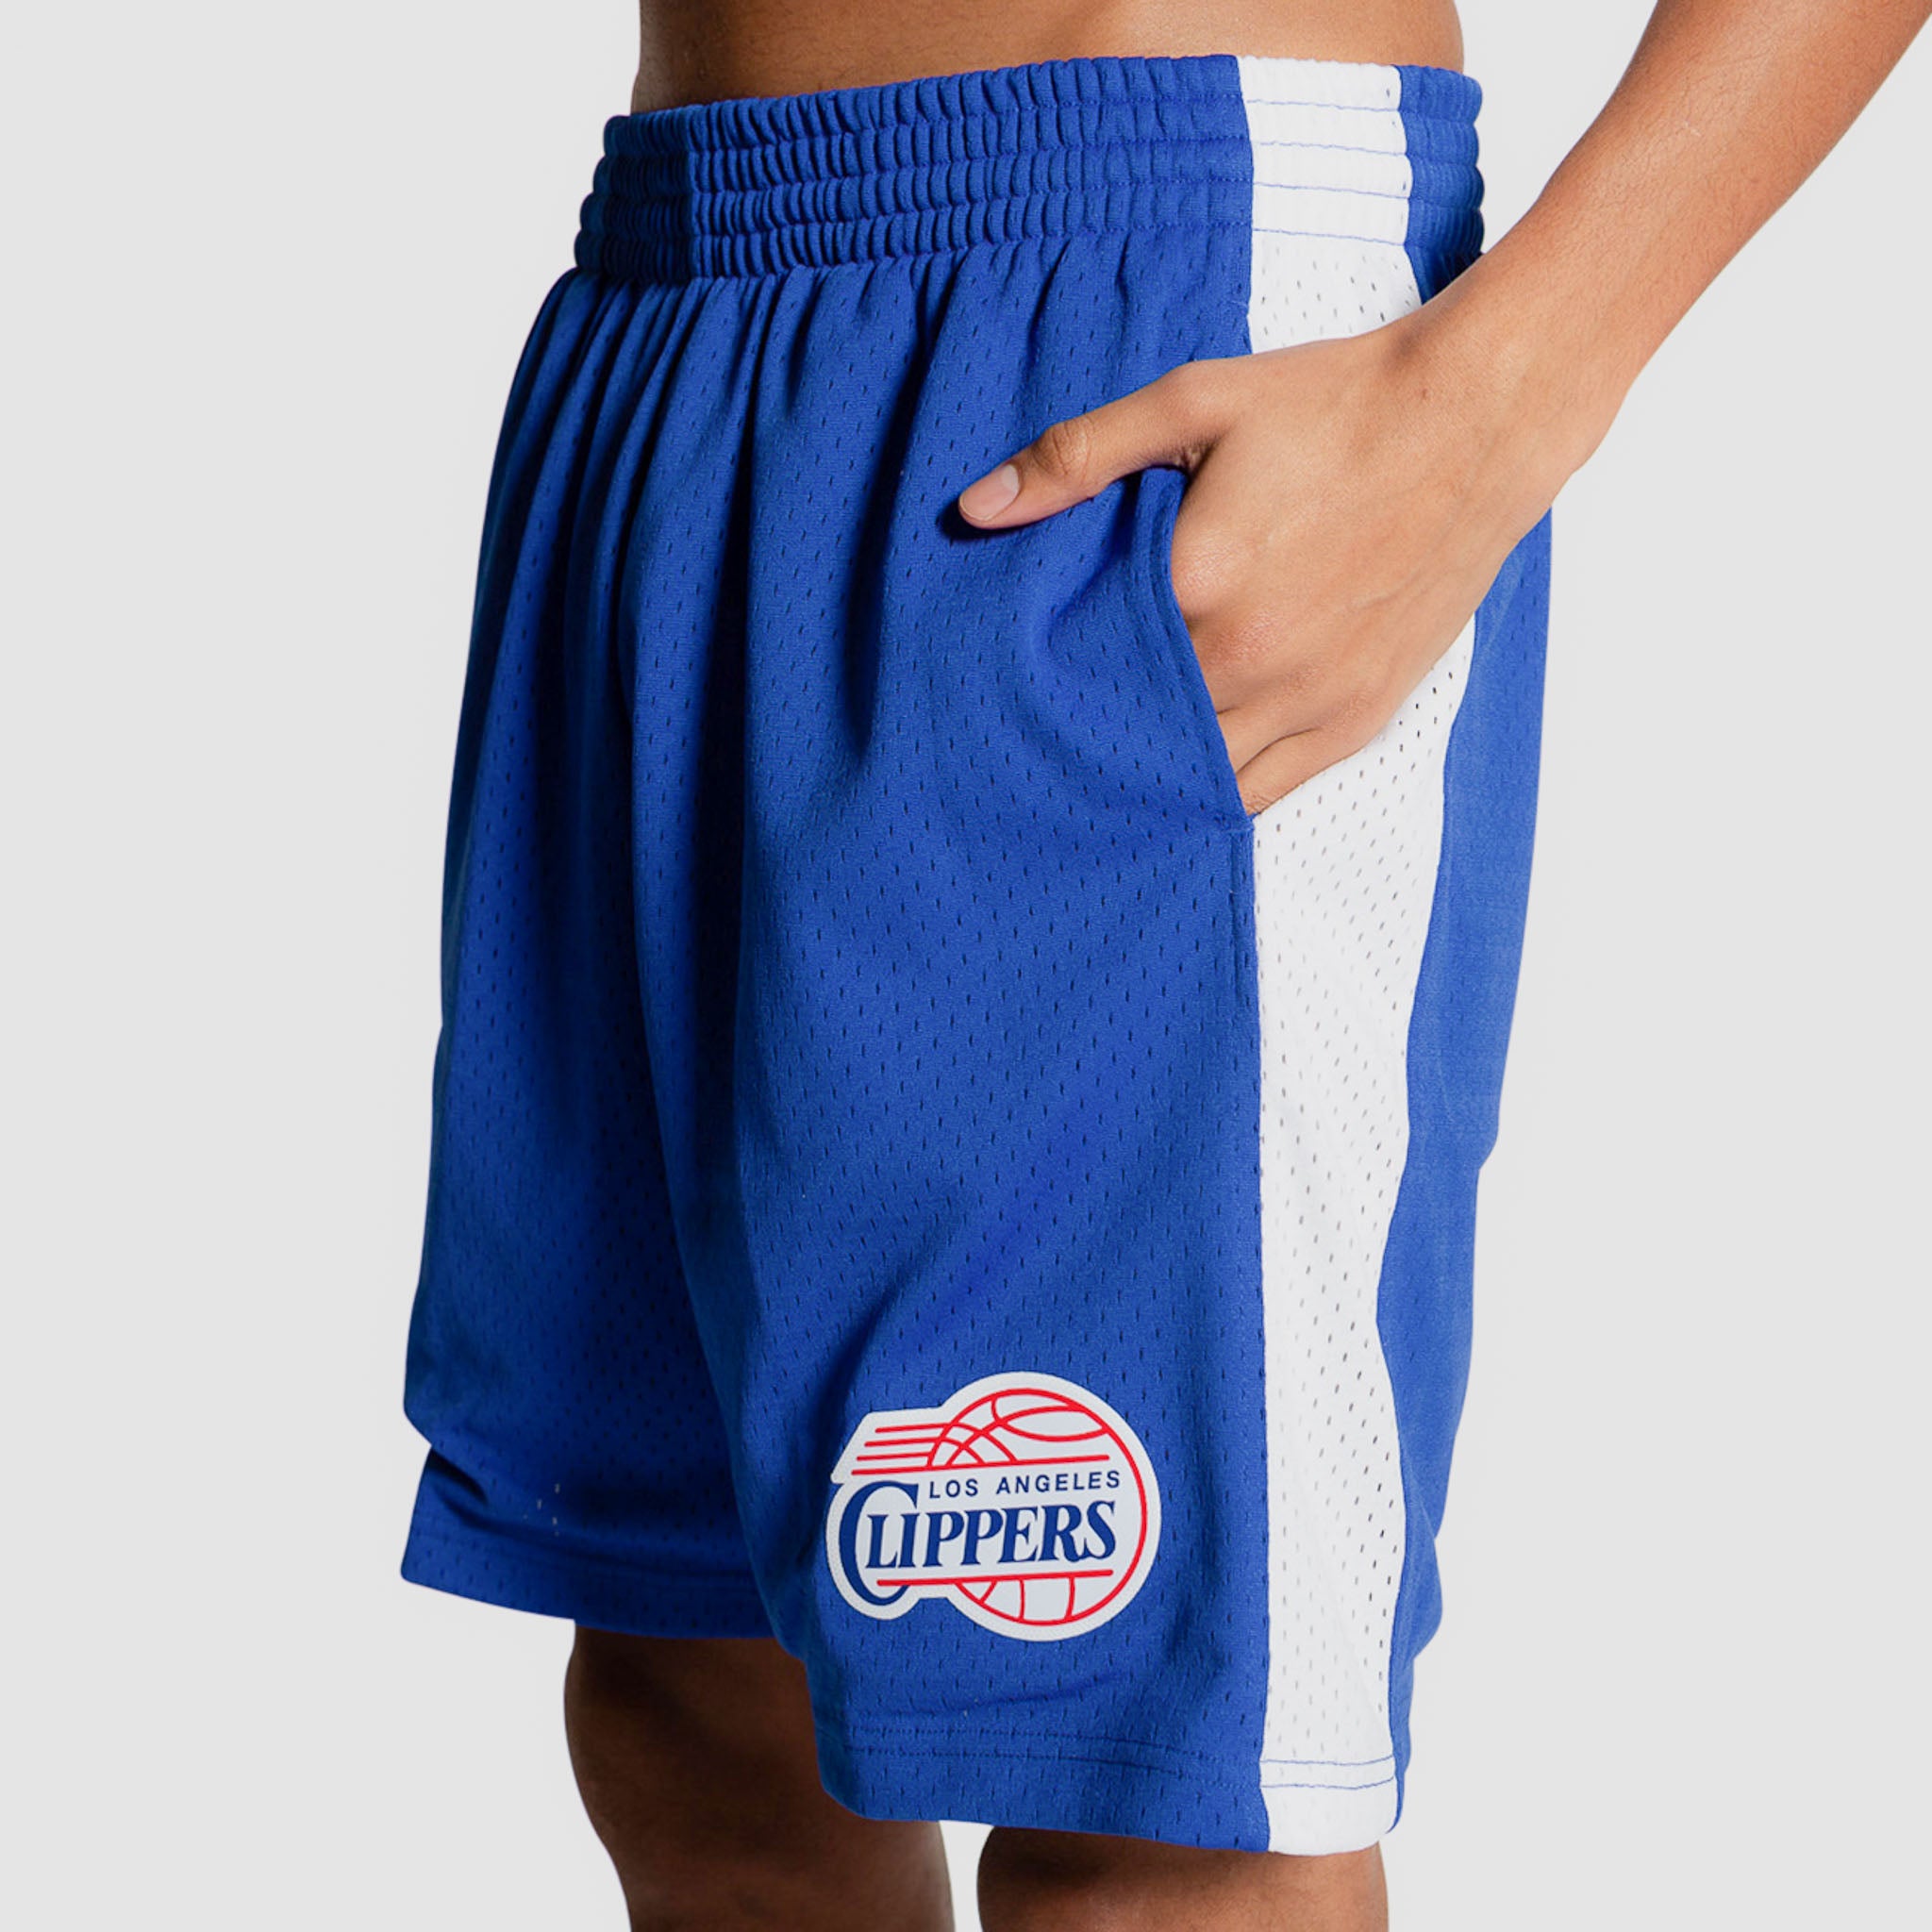 Mitchell & Ness Swingman Los Angeles Clippers 2002 Shorts